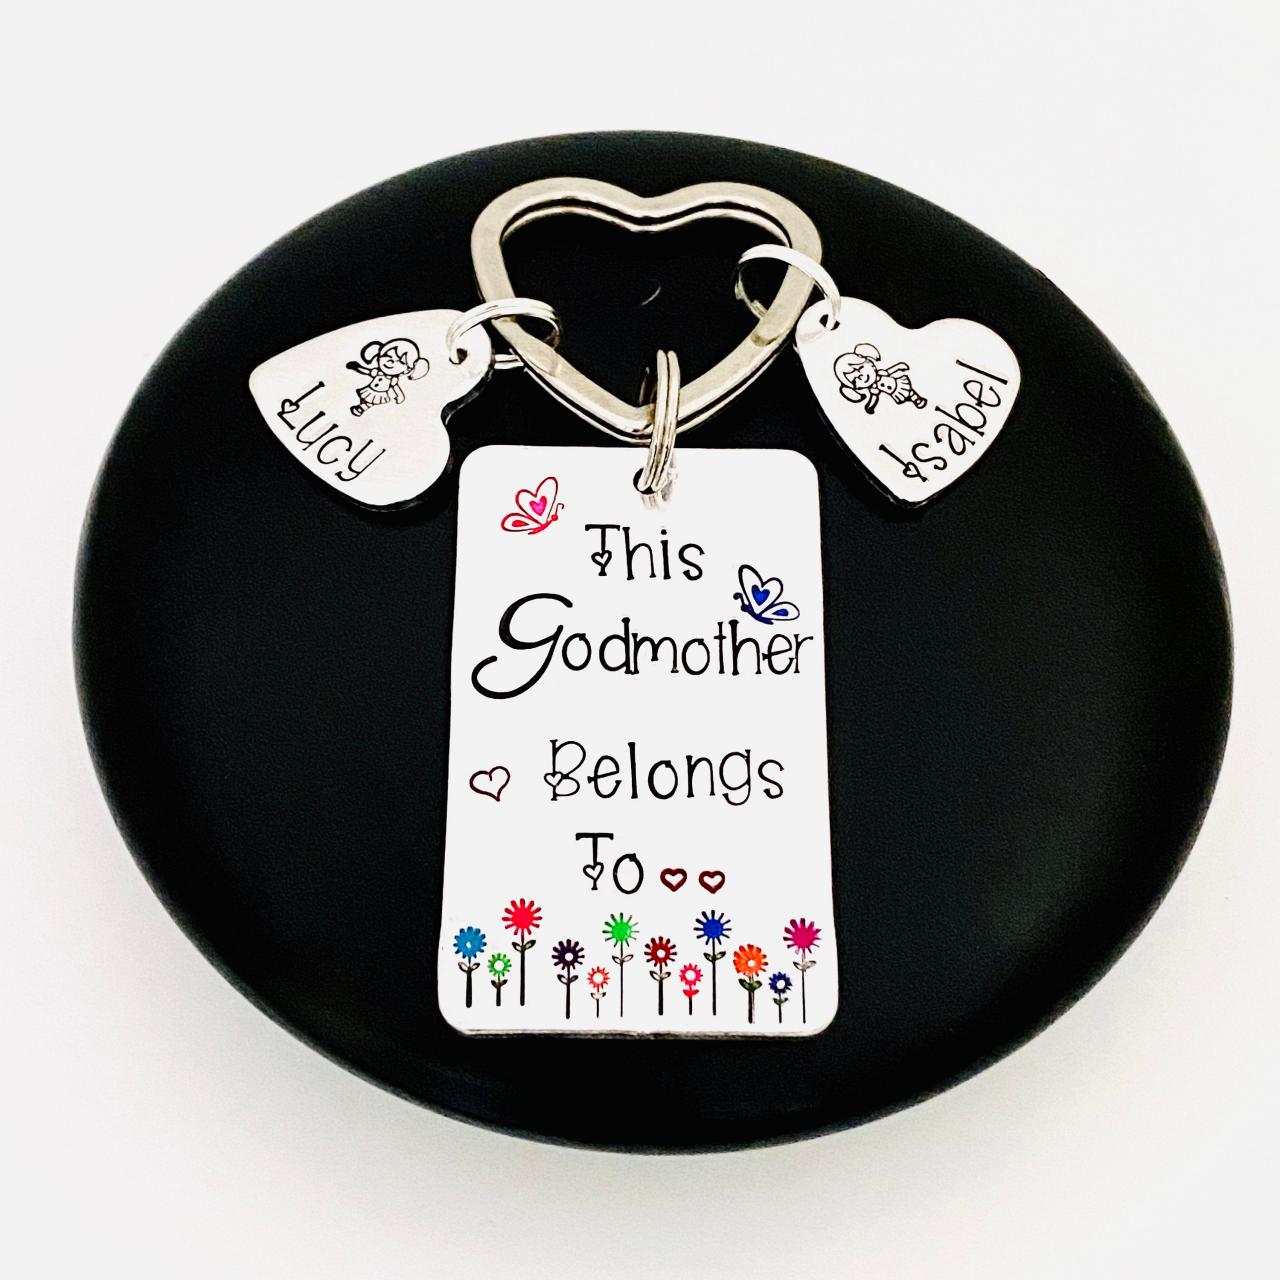 Personalised Godmother Keyring, This Godmother Belongs To, Godparent Gift, Family Tree, Personalized Godparent Keychain, Christening Gift..